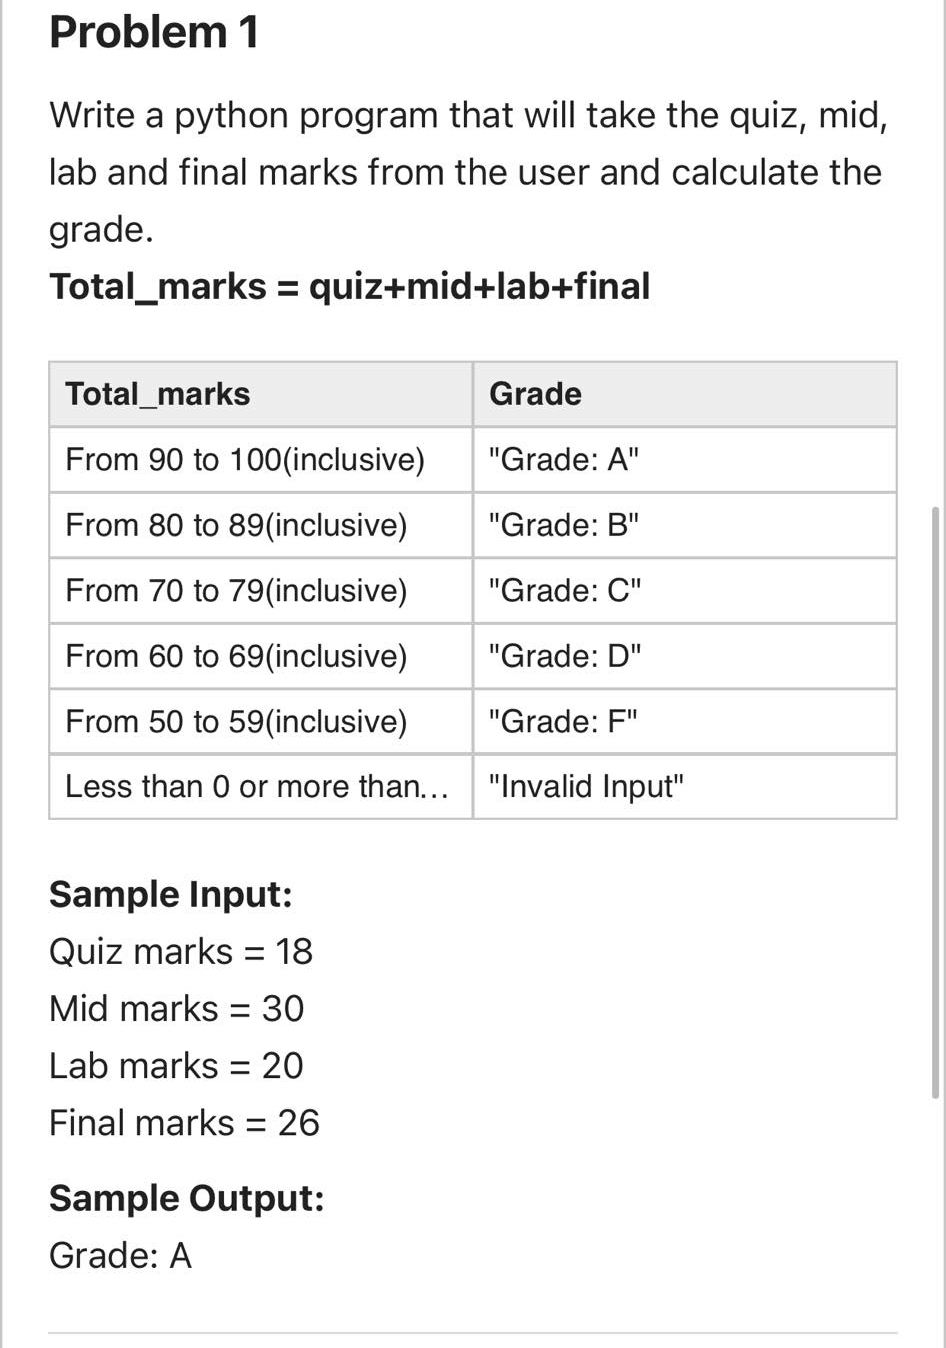 Problem 1
Write a python program that will take the quiz, mid,
lab and final marks from the user and calculate the
grade.
Total_marks = quiz+mid+lab+final
Total_marks
Grade
From 90 to 100(inclusive)
"Grade: A"
From 80 to 89(inclusive)
"Grade: B"
From 70 to 79(inclusive)
"Grade: C"
From 60 to 69(inclusive)
"Grade: D"
From 50 to 59(inclusive)
"Grade: F"
Less than 0 or more than...
"Invalid Input"
Sample Input:
Quiz marks = 18
%3D
Mid marks = 30
Lab marks = 20
Final marks = 26
Sample Output:
Grade: A
